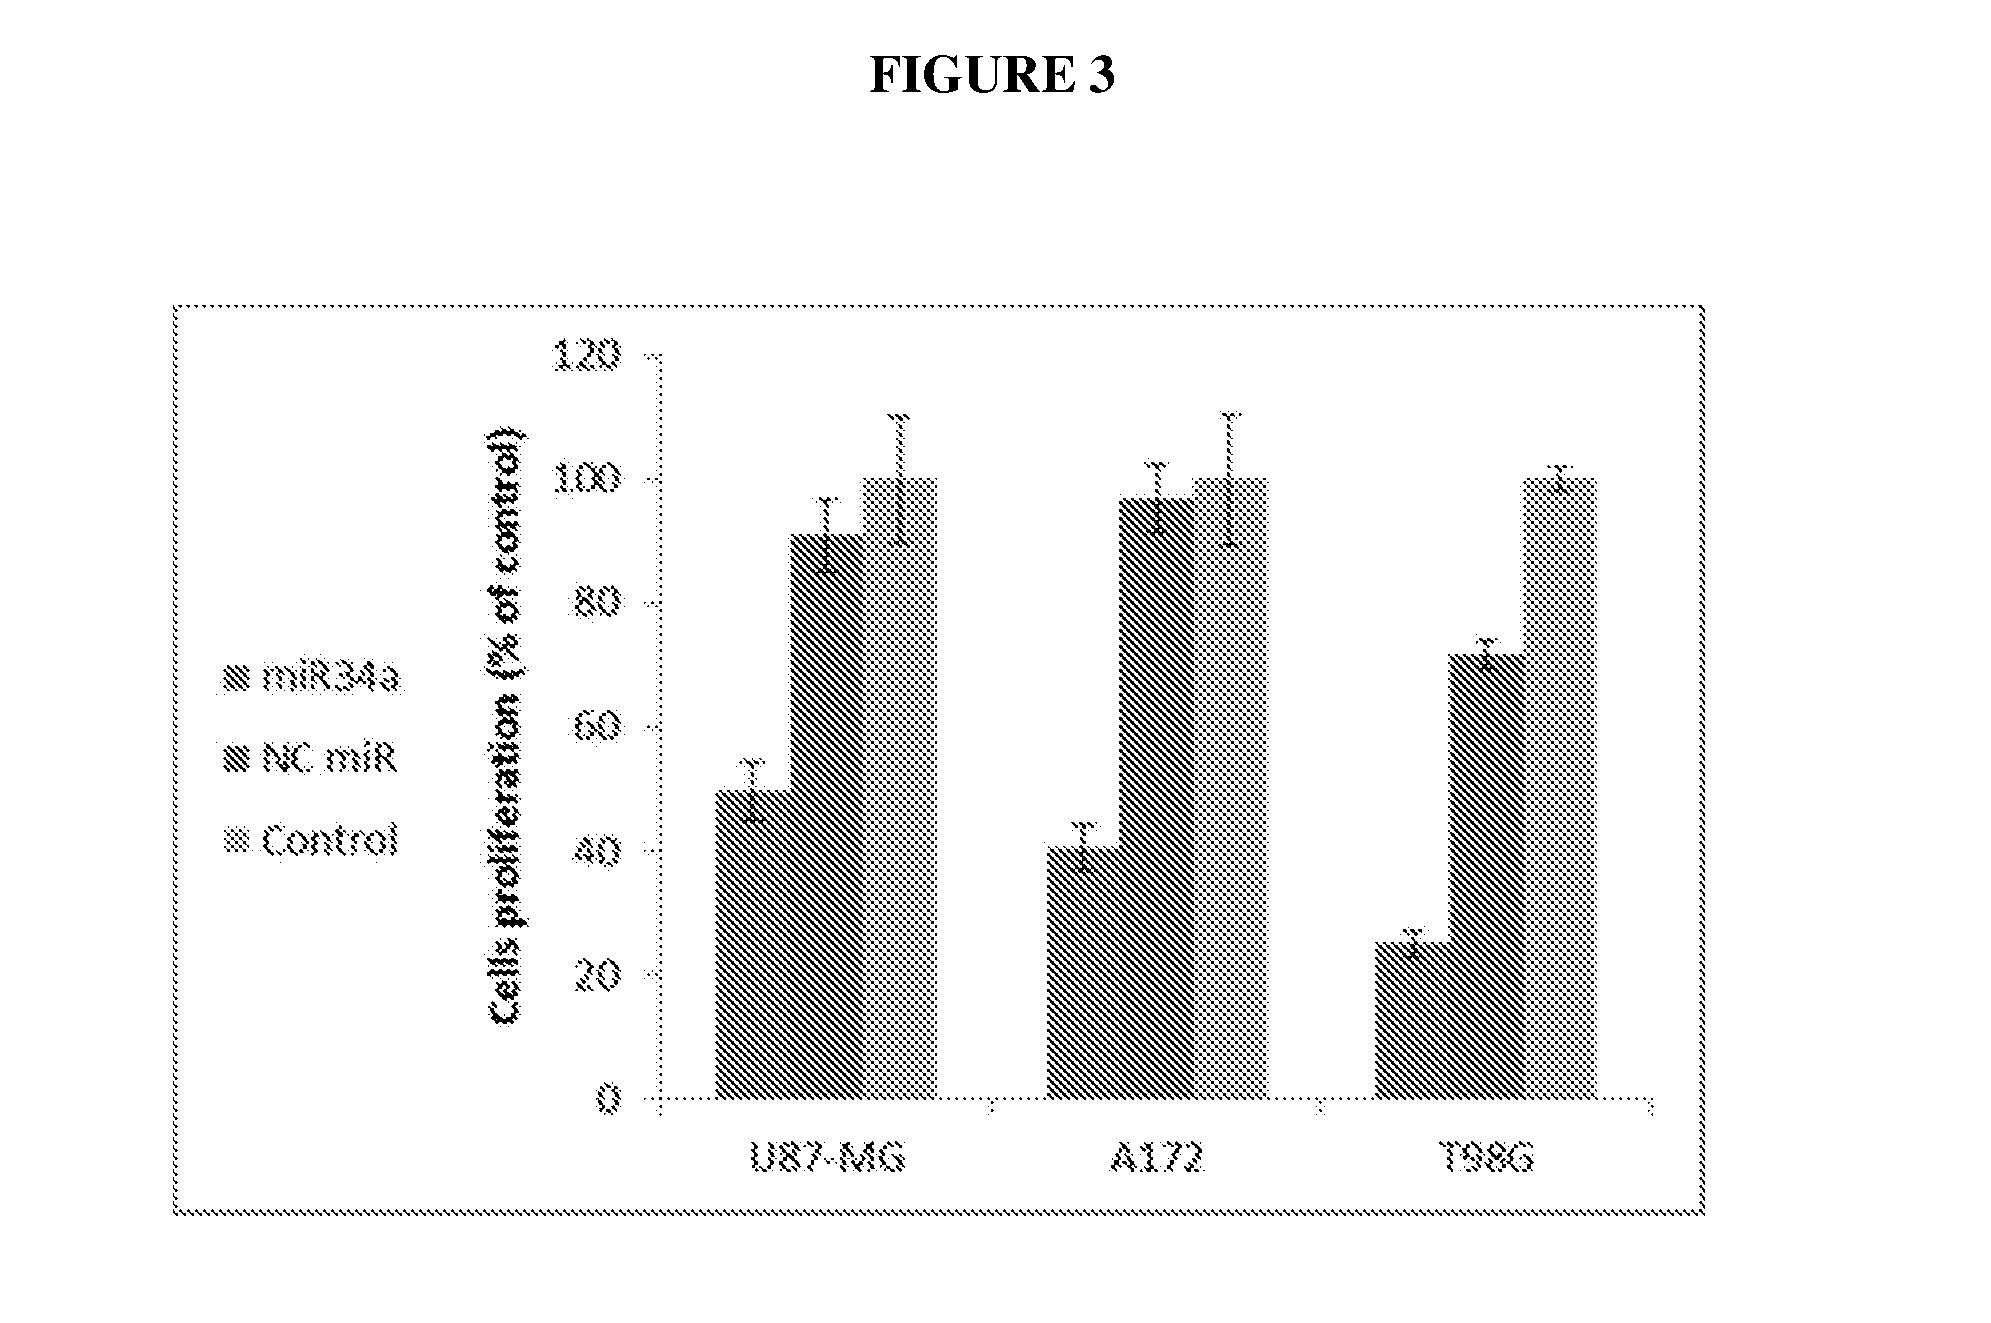 Nanocarrier system for micrornas and uses thereof